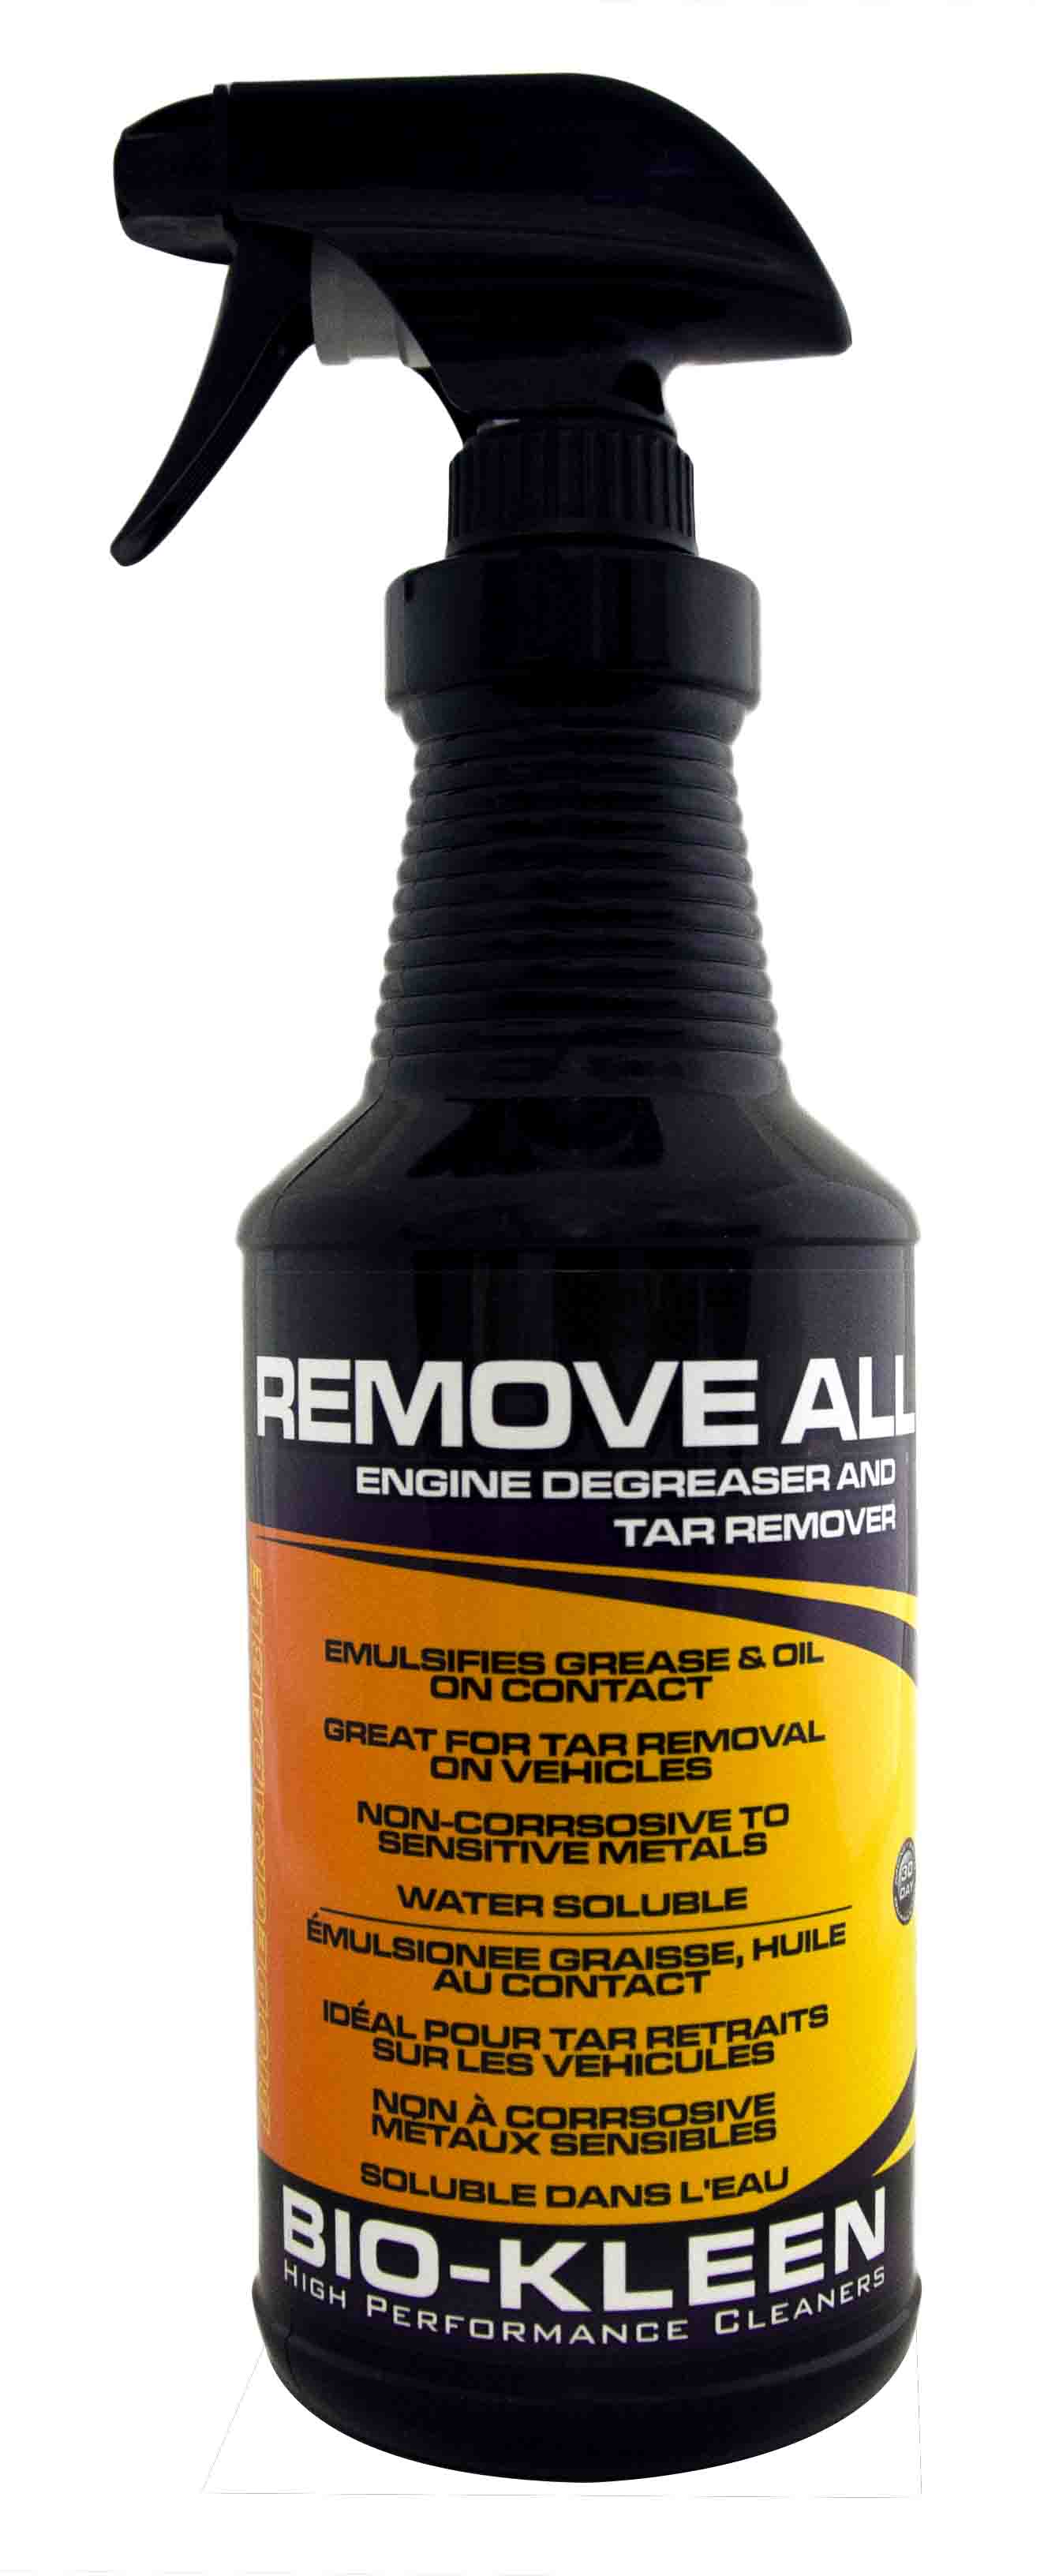 Remove All - Engine Degreasing Engine Degreasing, Degreasing an Engine, Bio-Kleen Remove All